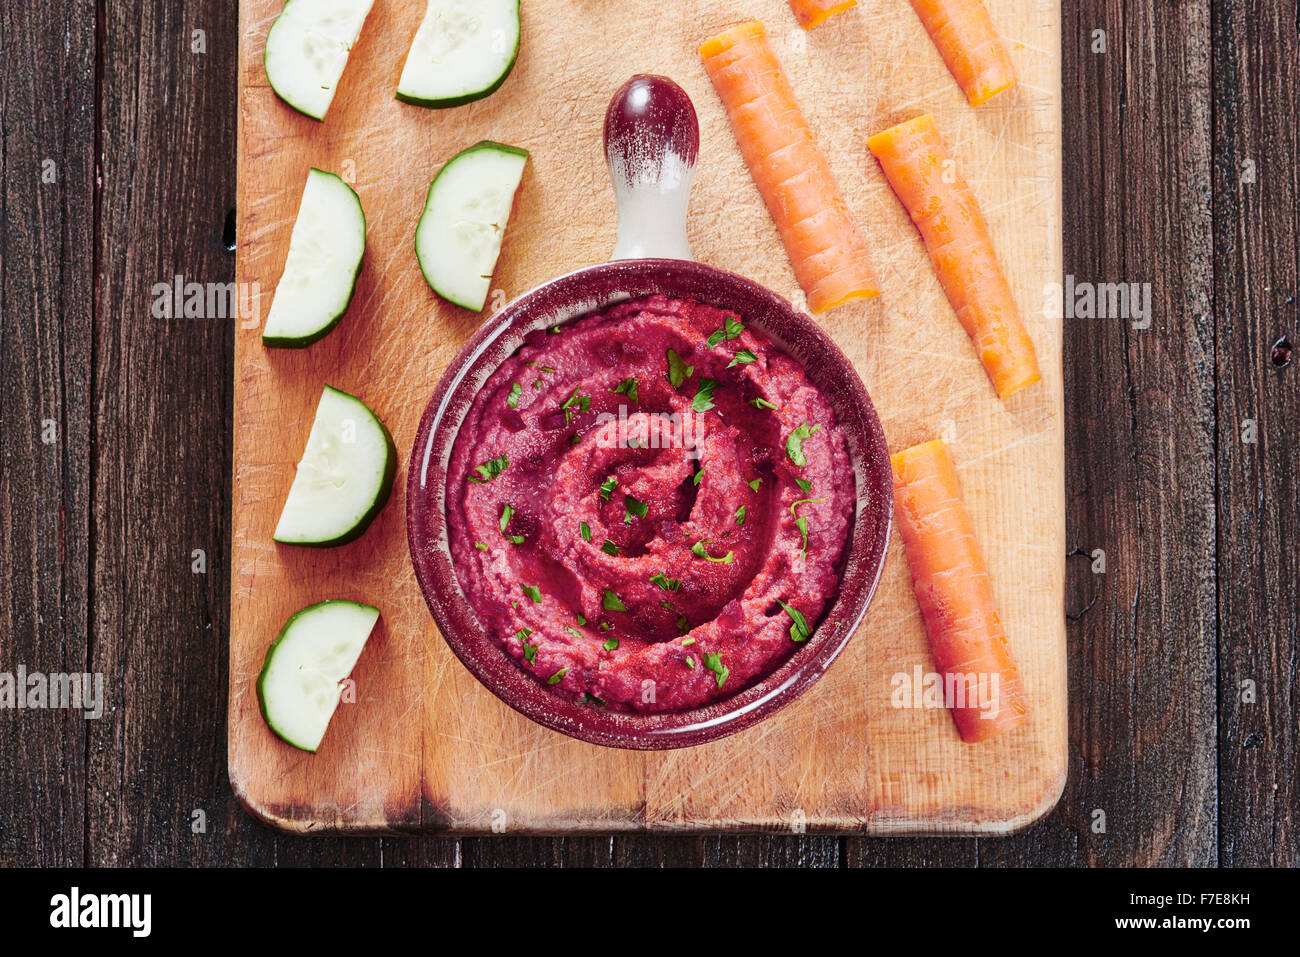 Hummus with beetroot in bowl on cutting board, surrounded by carrots and cucumber, on a dark wood table Stock Photo